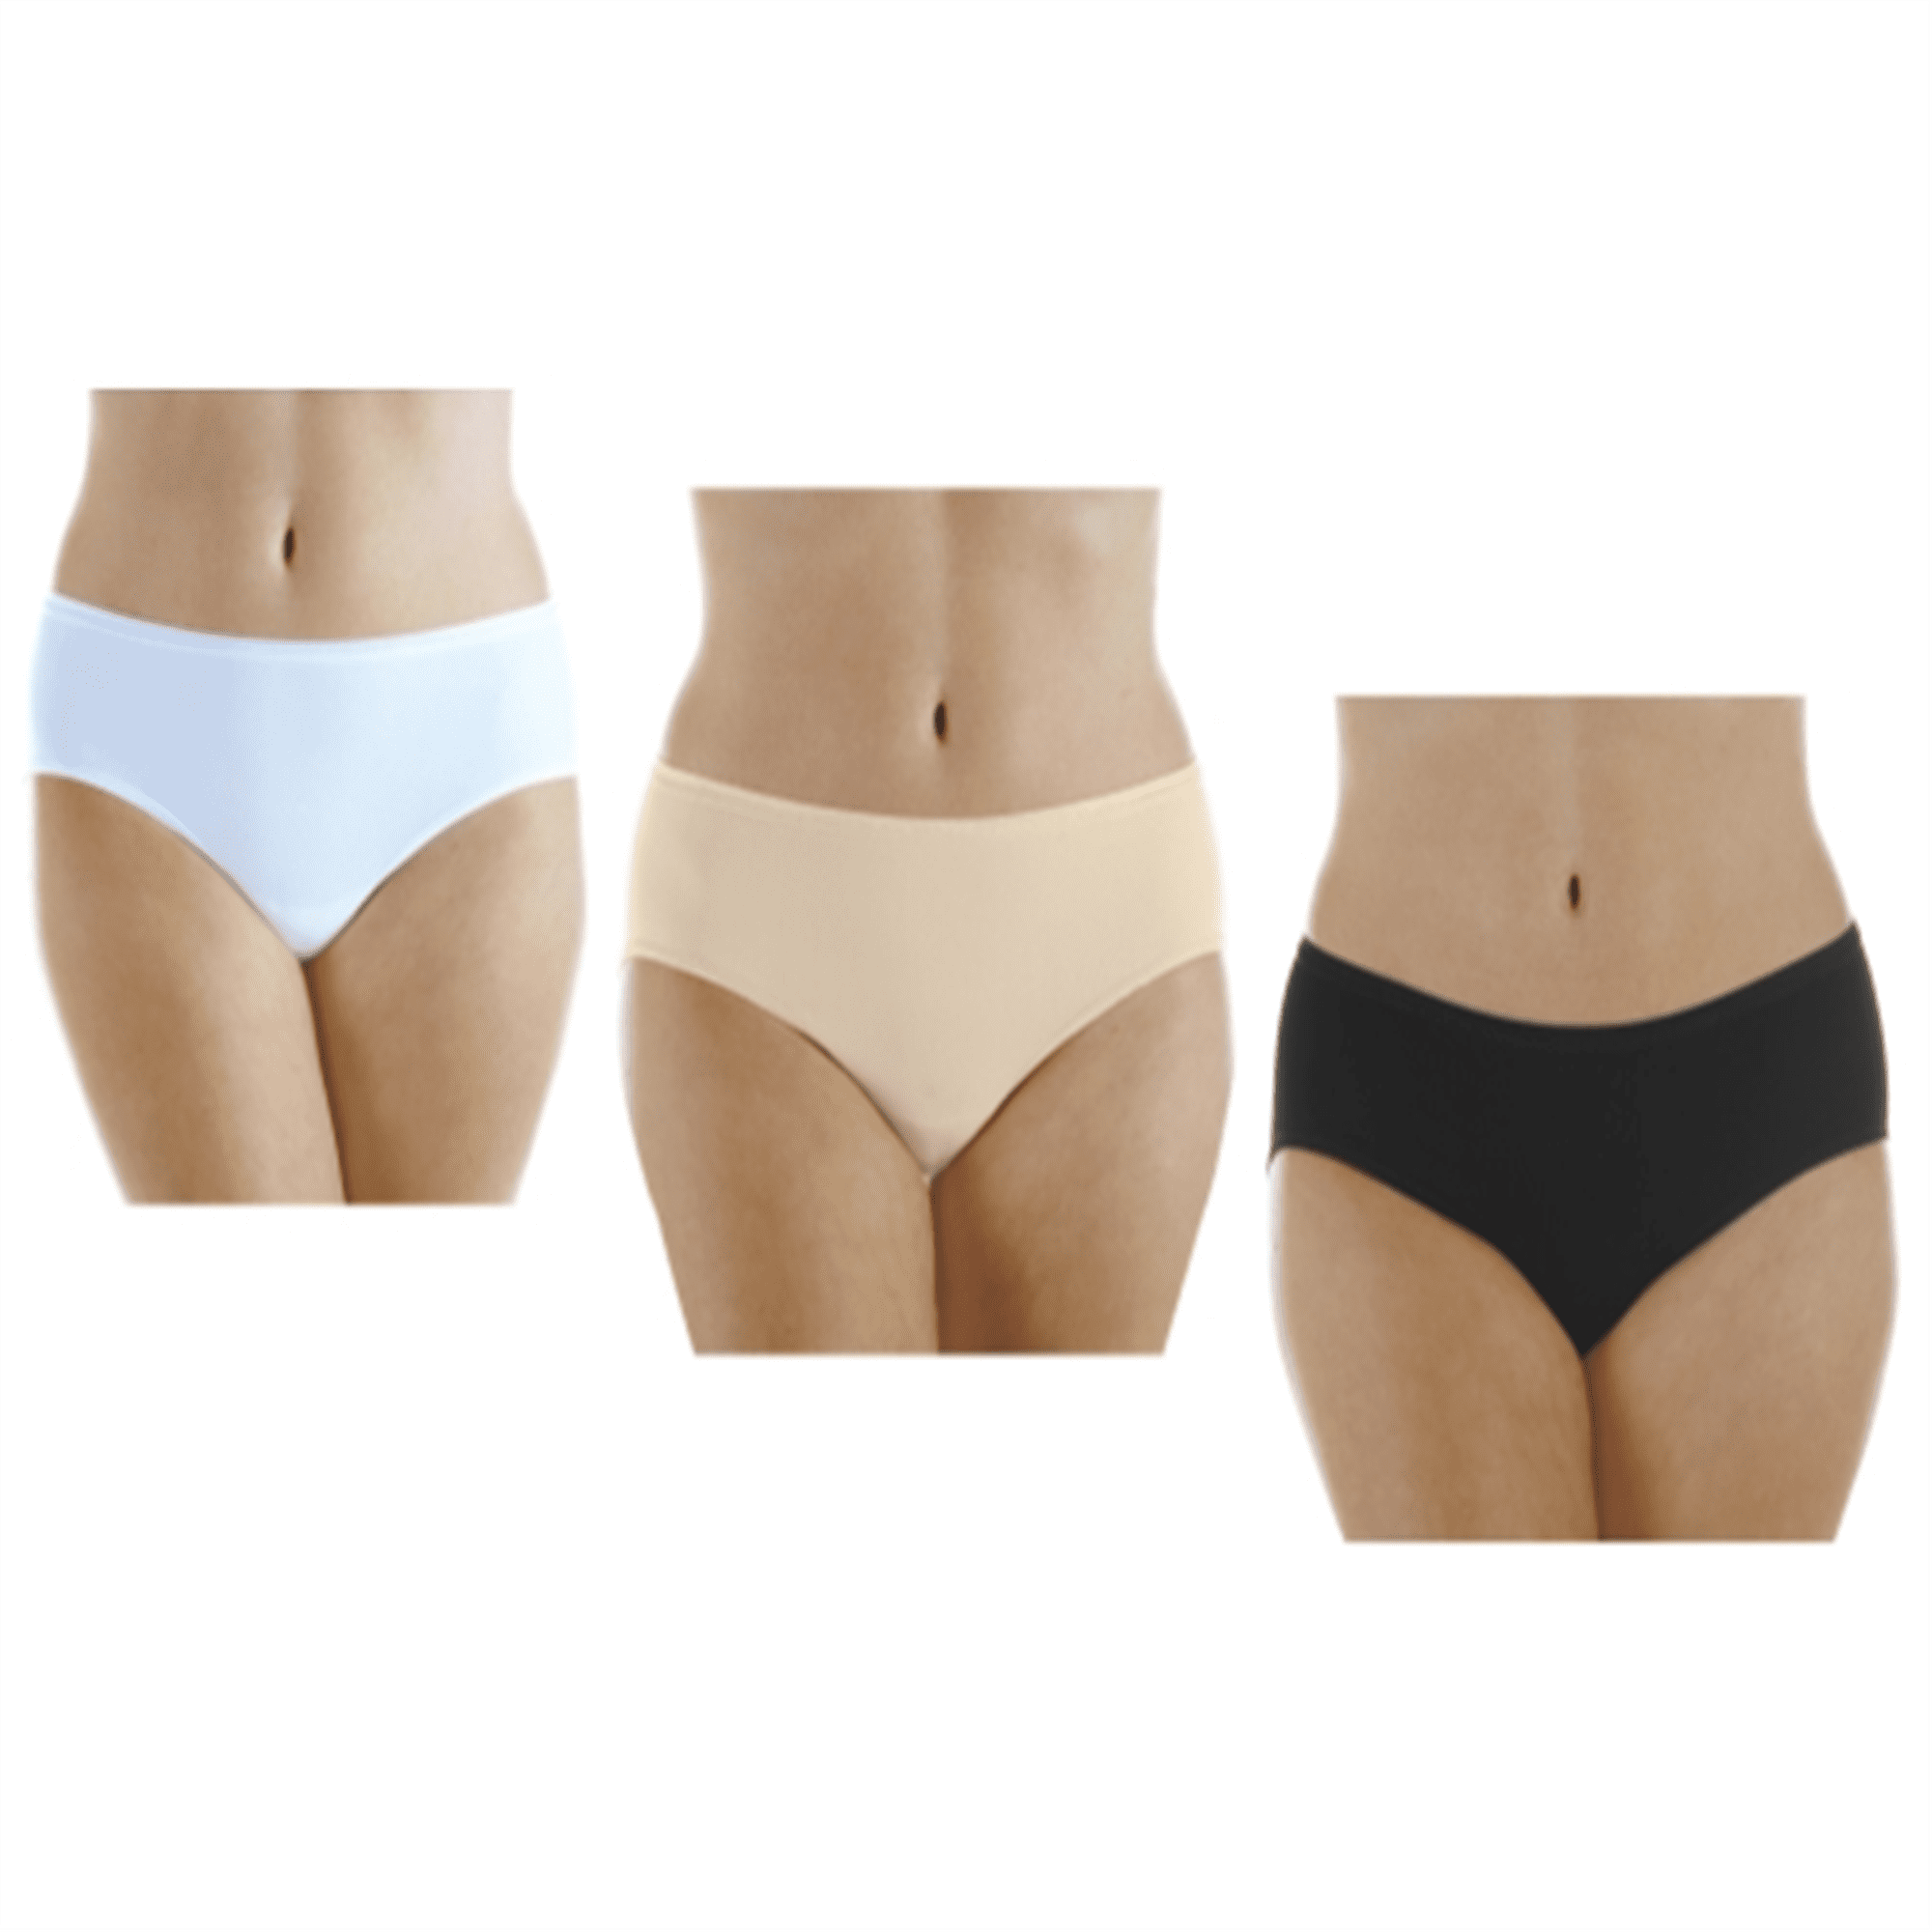 for Tee Details about   4period 5 Pack High Absorbency for Heavy Flow Period Panties; Leakproof 